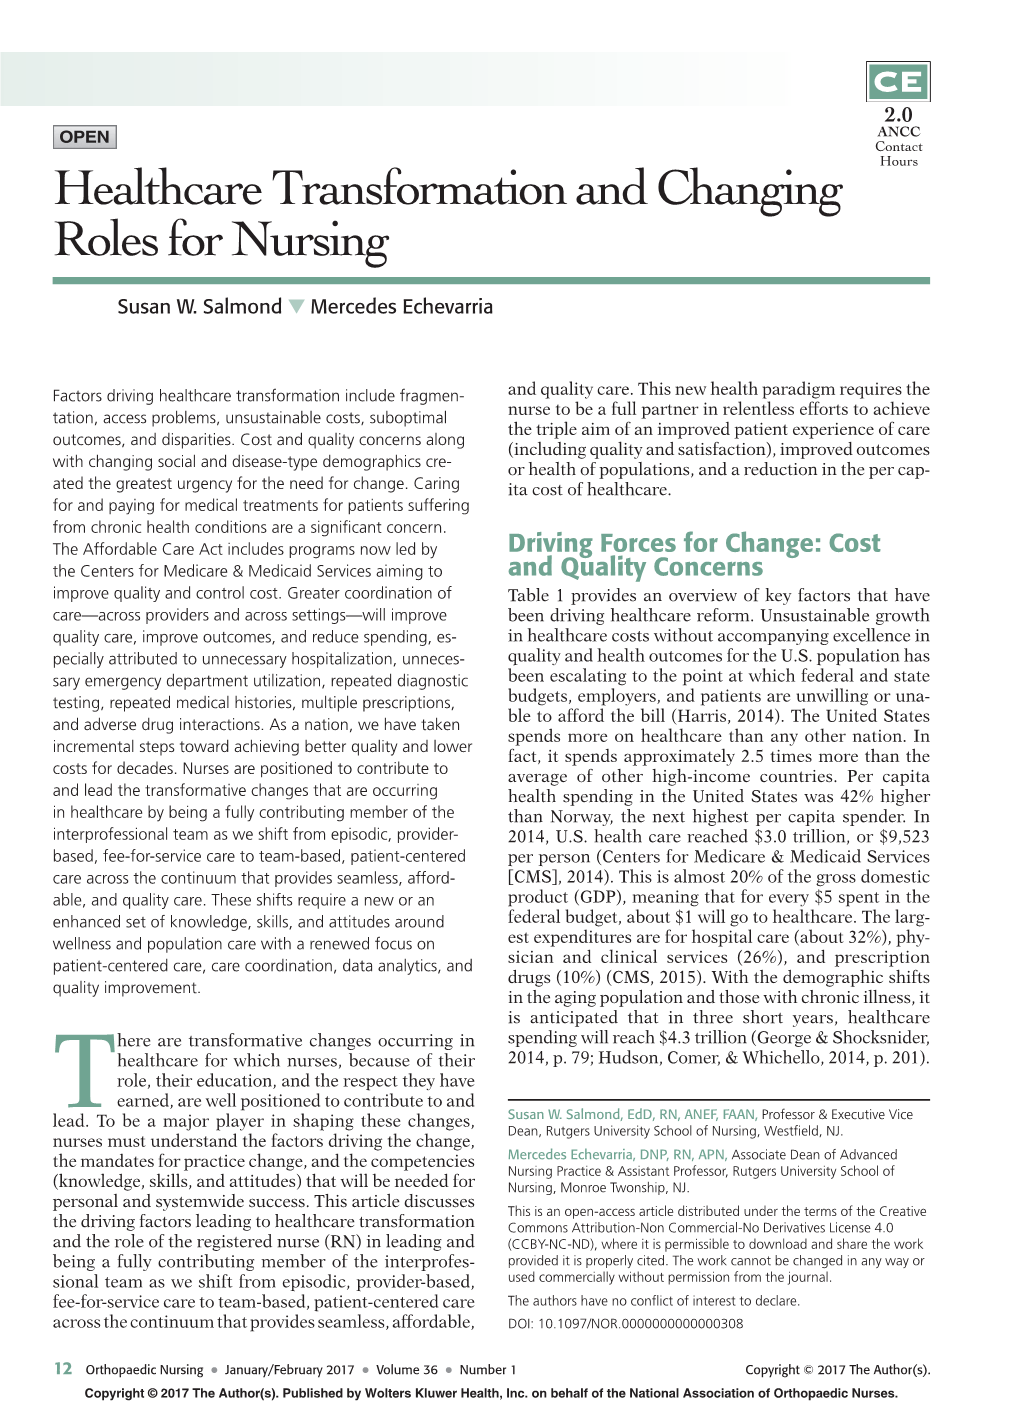 Healthcare Transformation and Changing Roles for Nursing